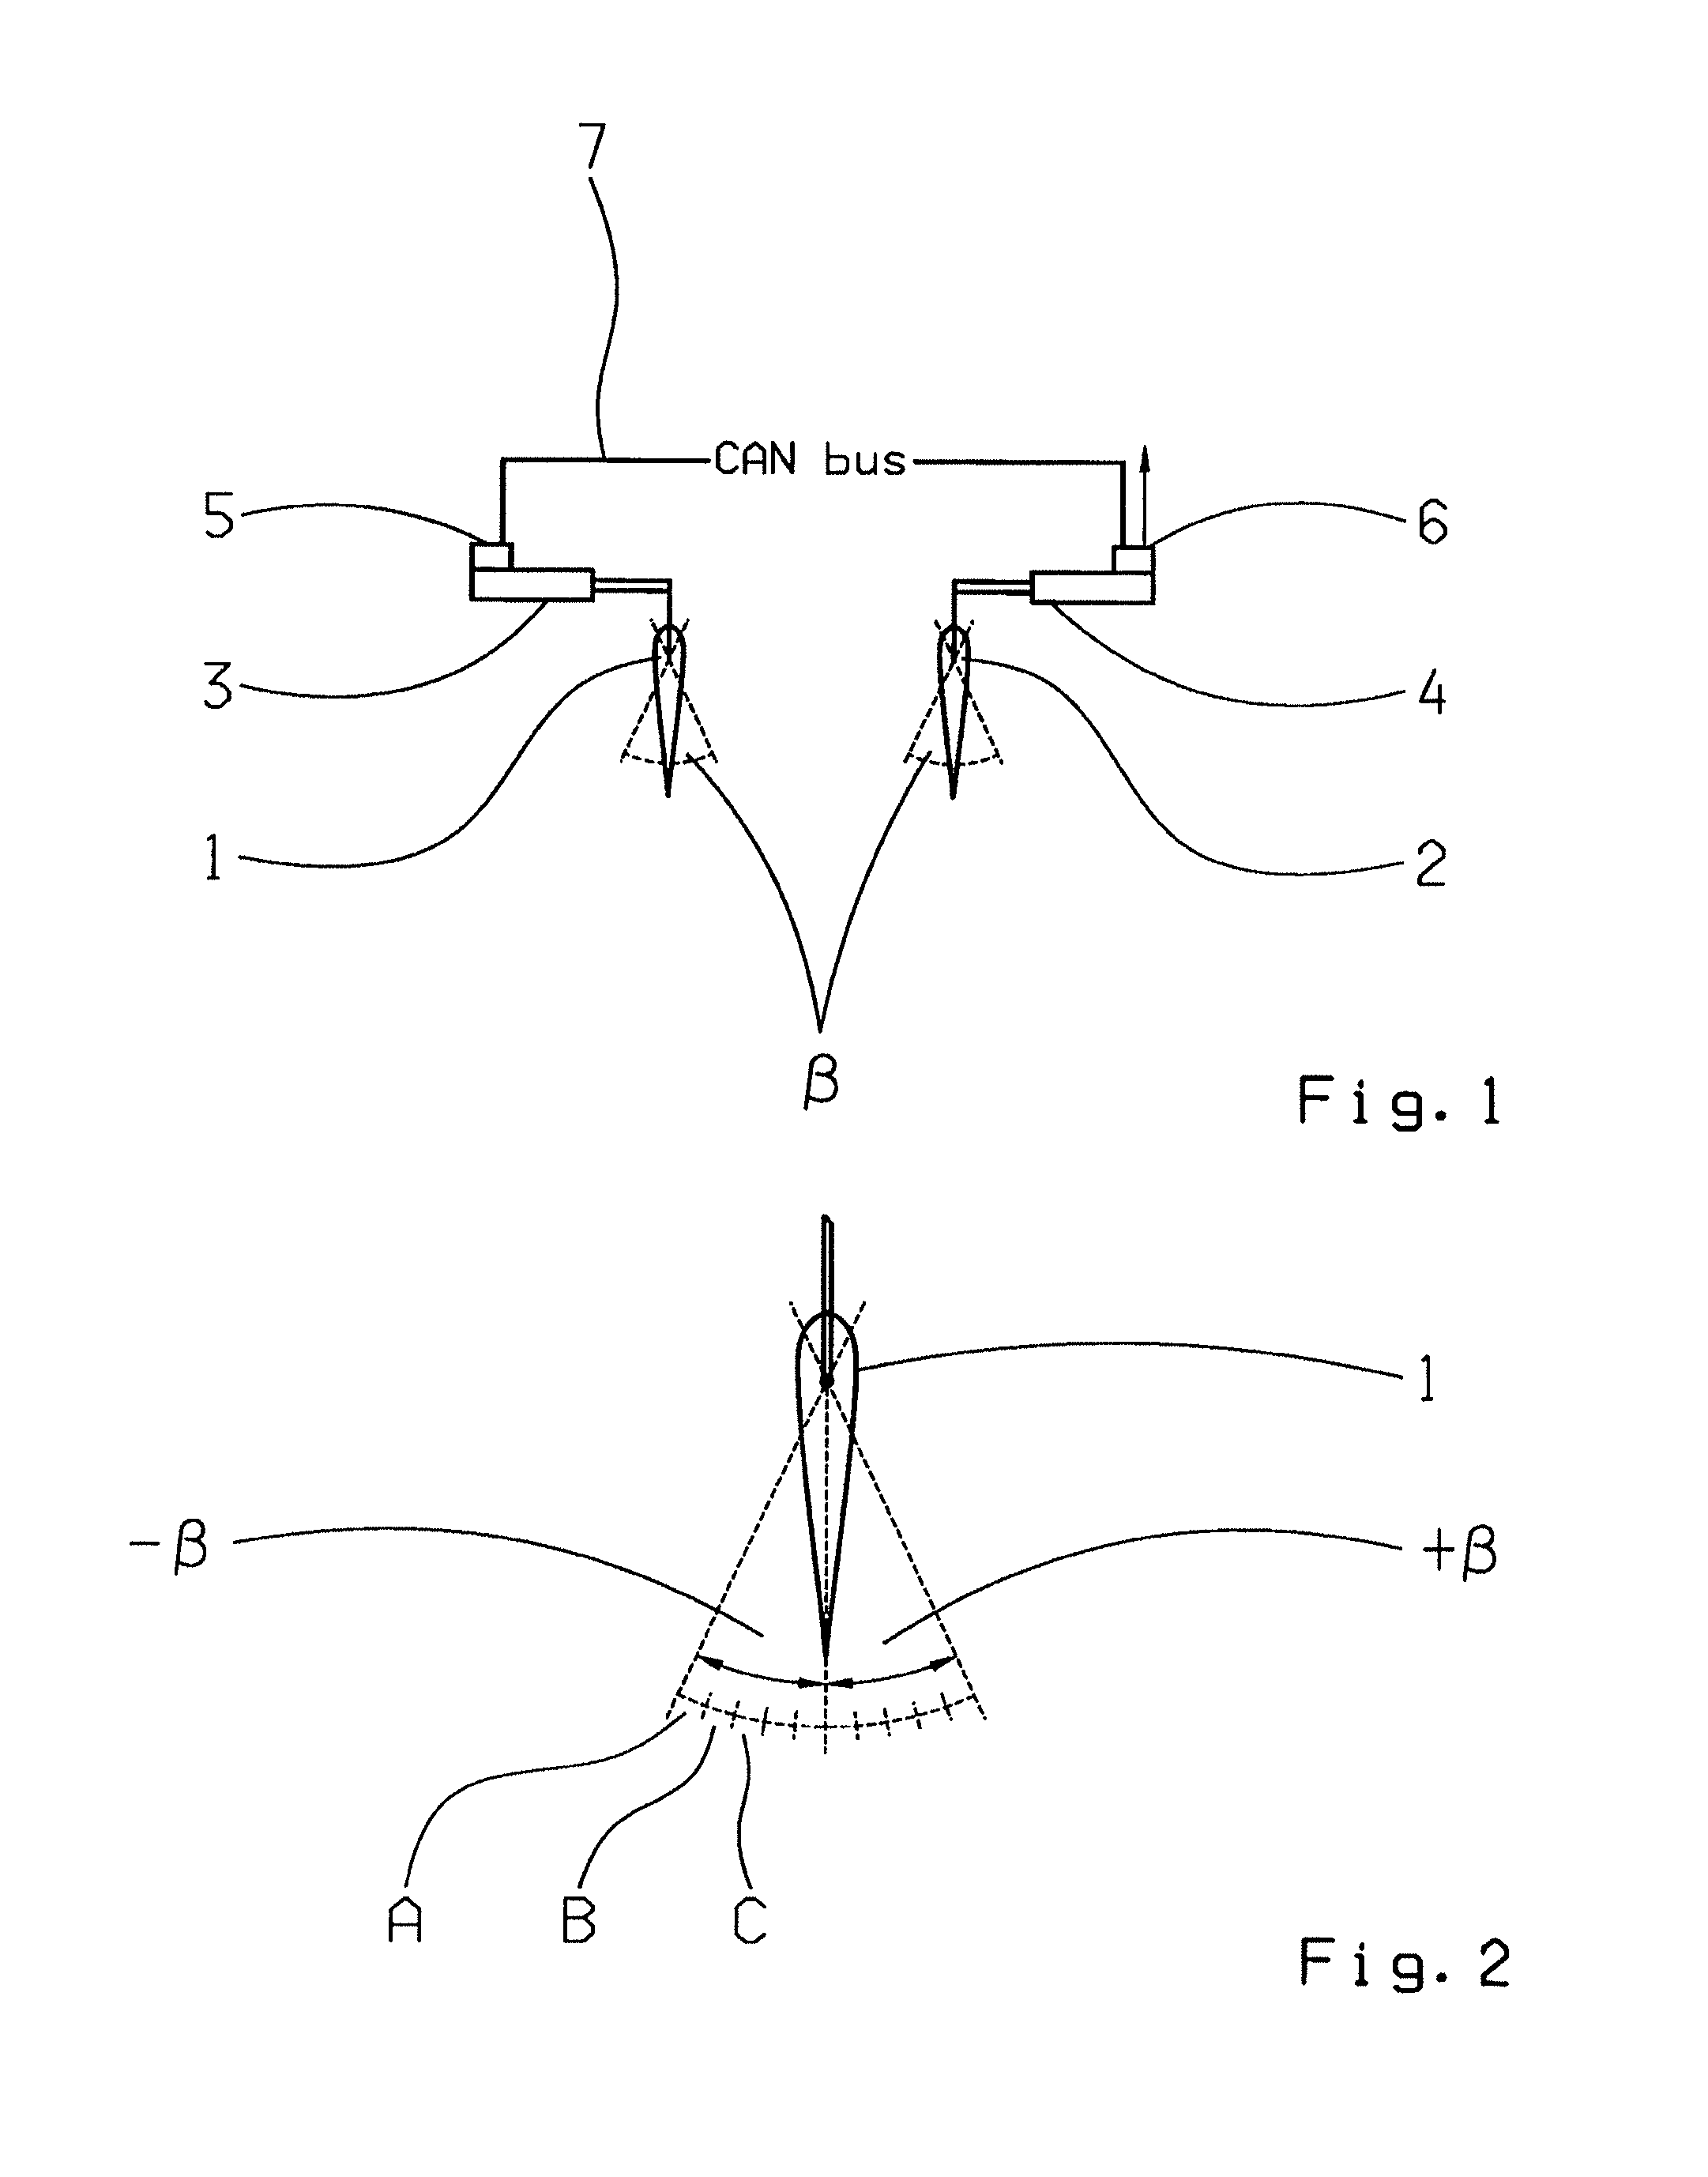 Method for verifying the toe angle of a ship's rudders